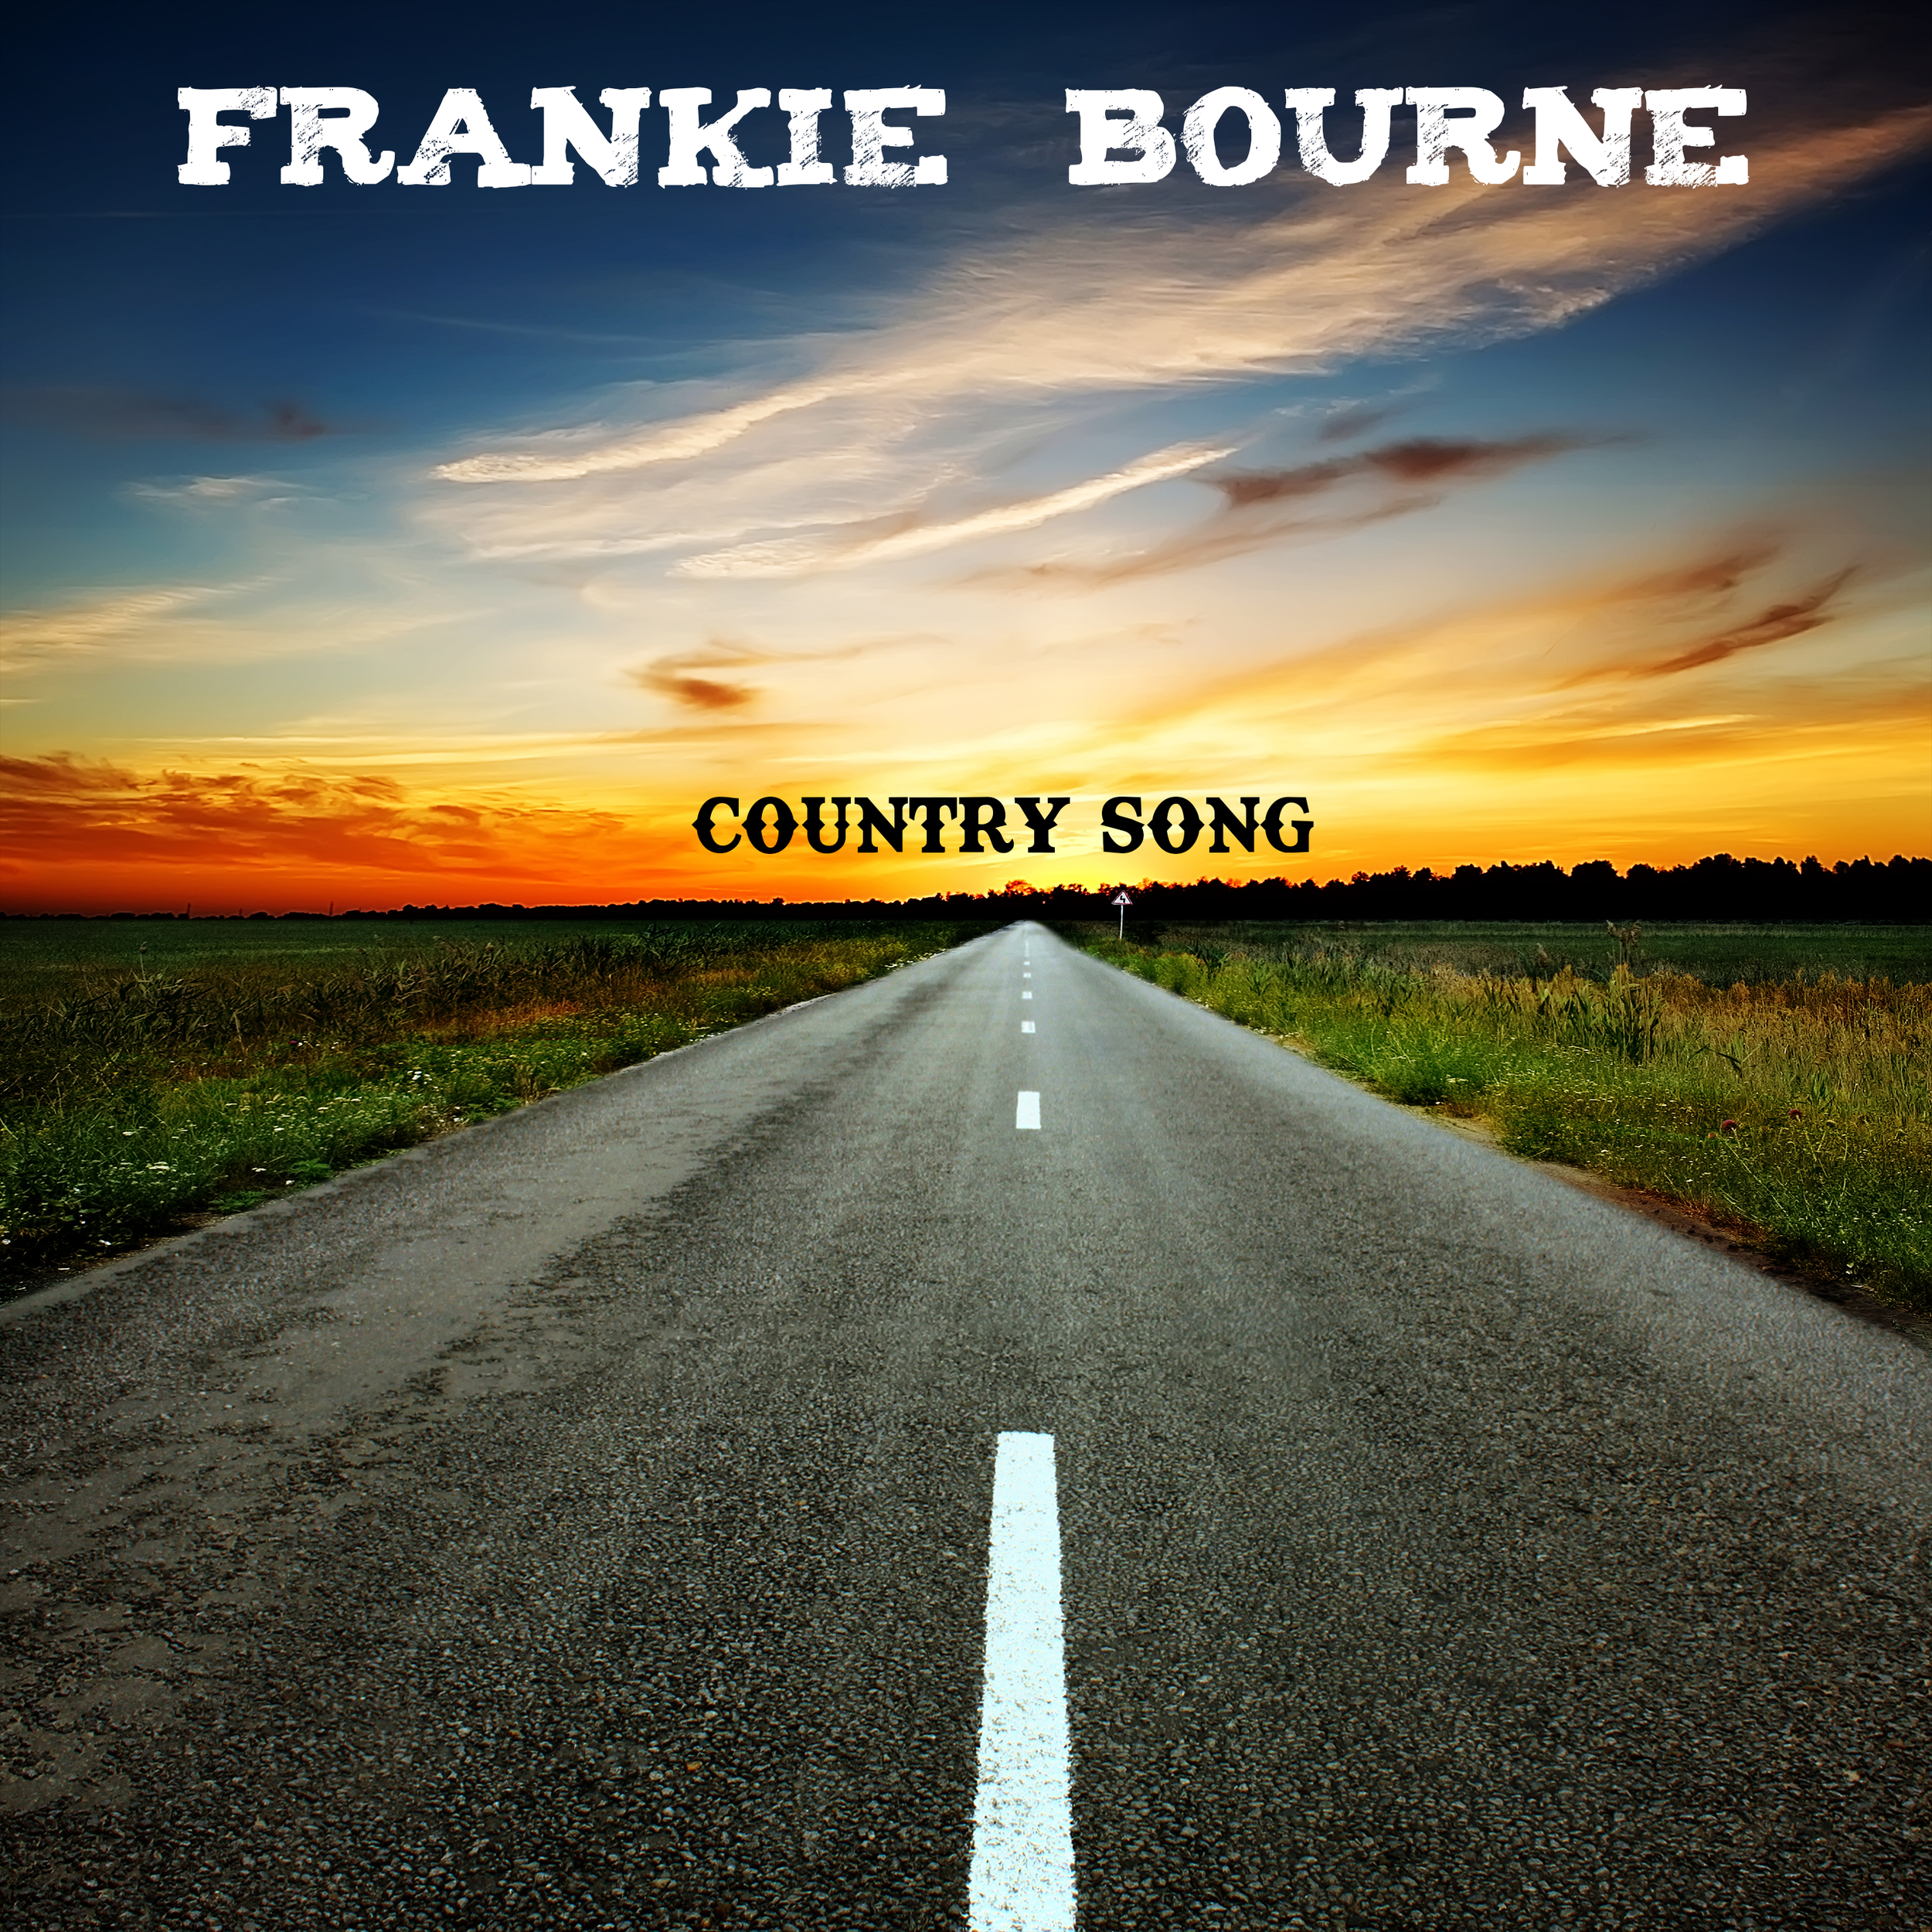 Country Song album art NEW 2.png